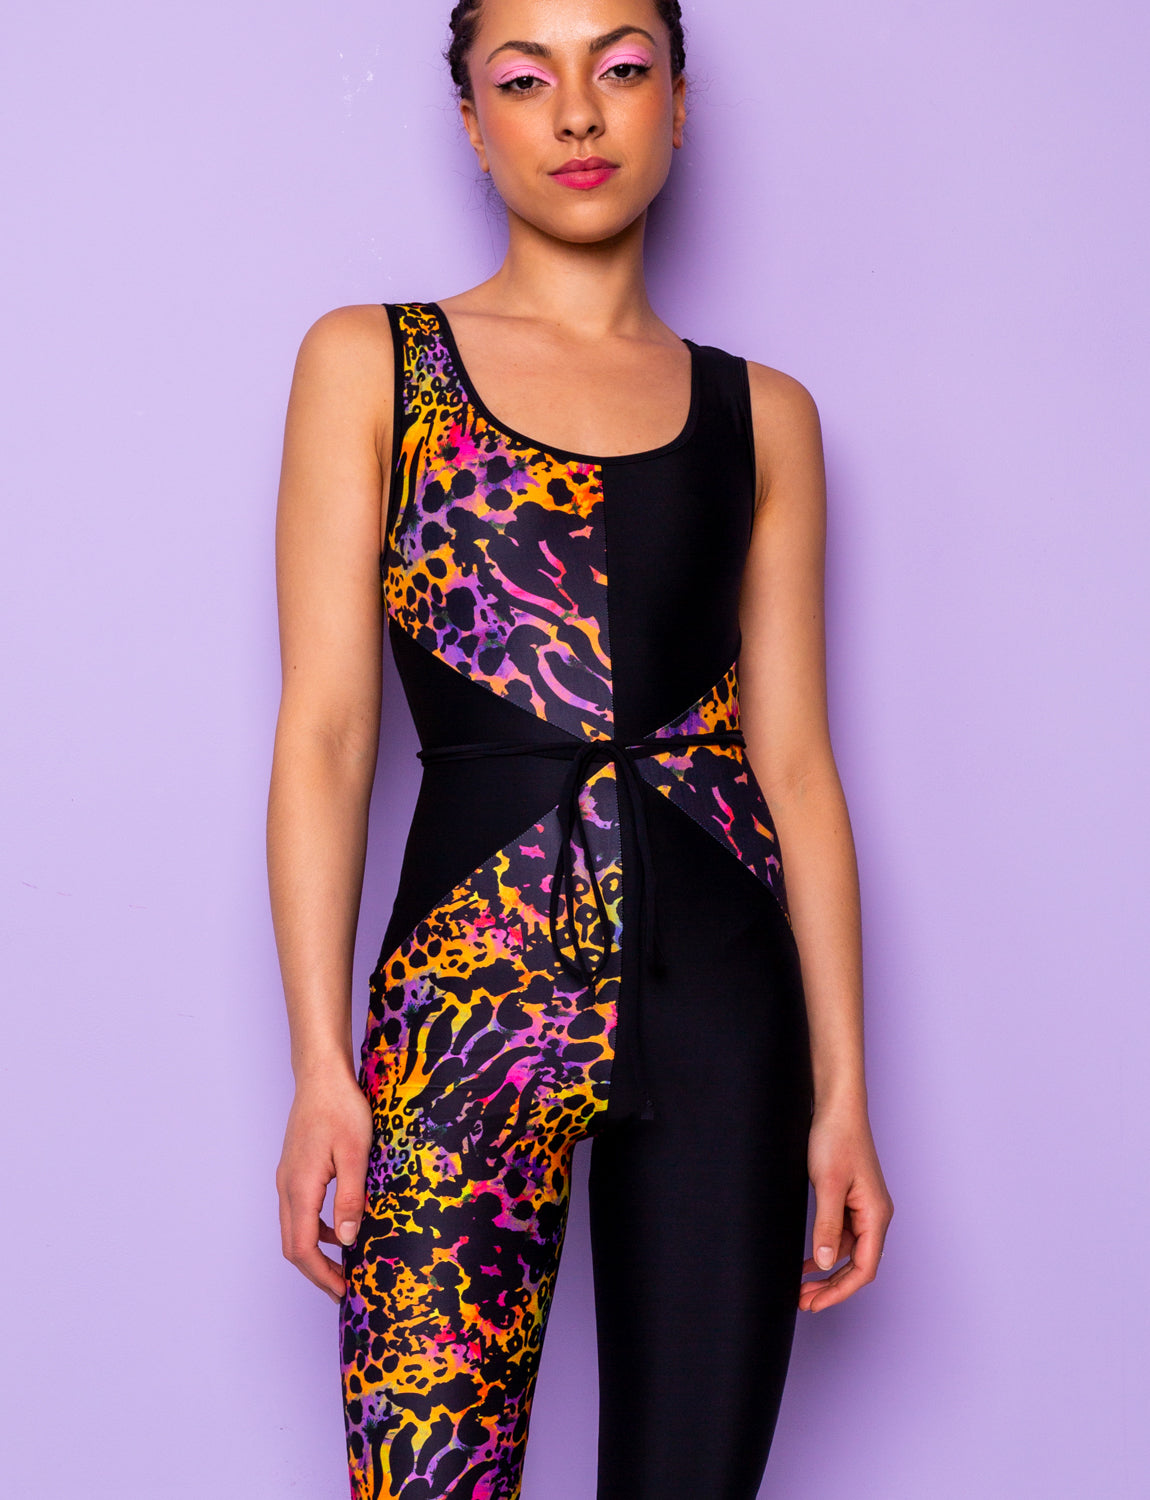 Woman modelling a purple leopard print catsuit with contrasting black panels.